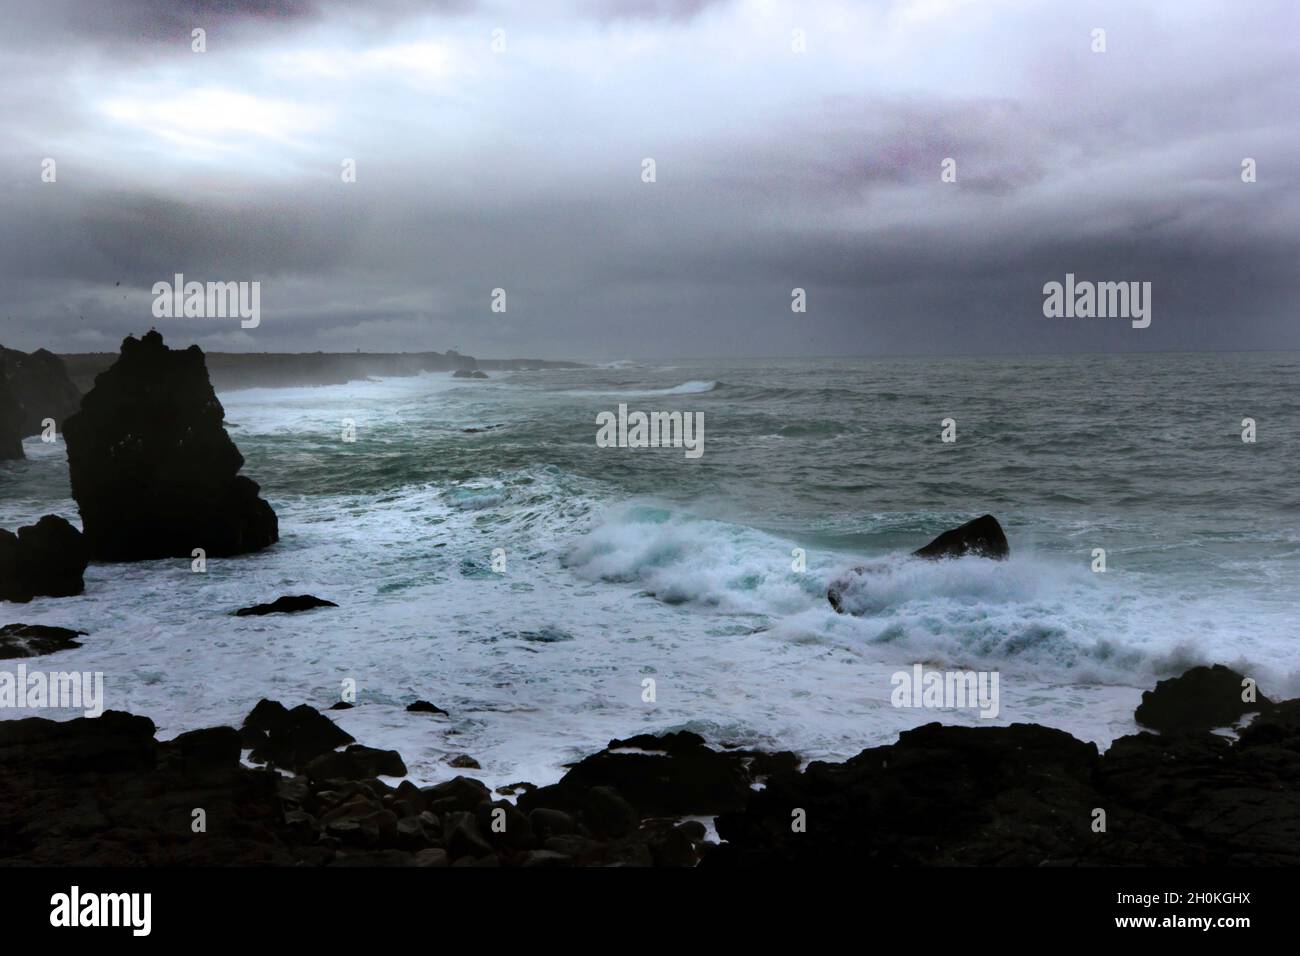 Rough seas battering the rocky shoreline and surf with stormy sky Stock Photo